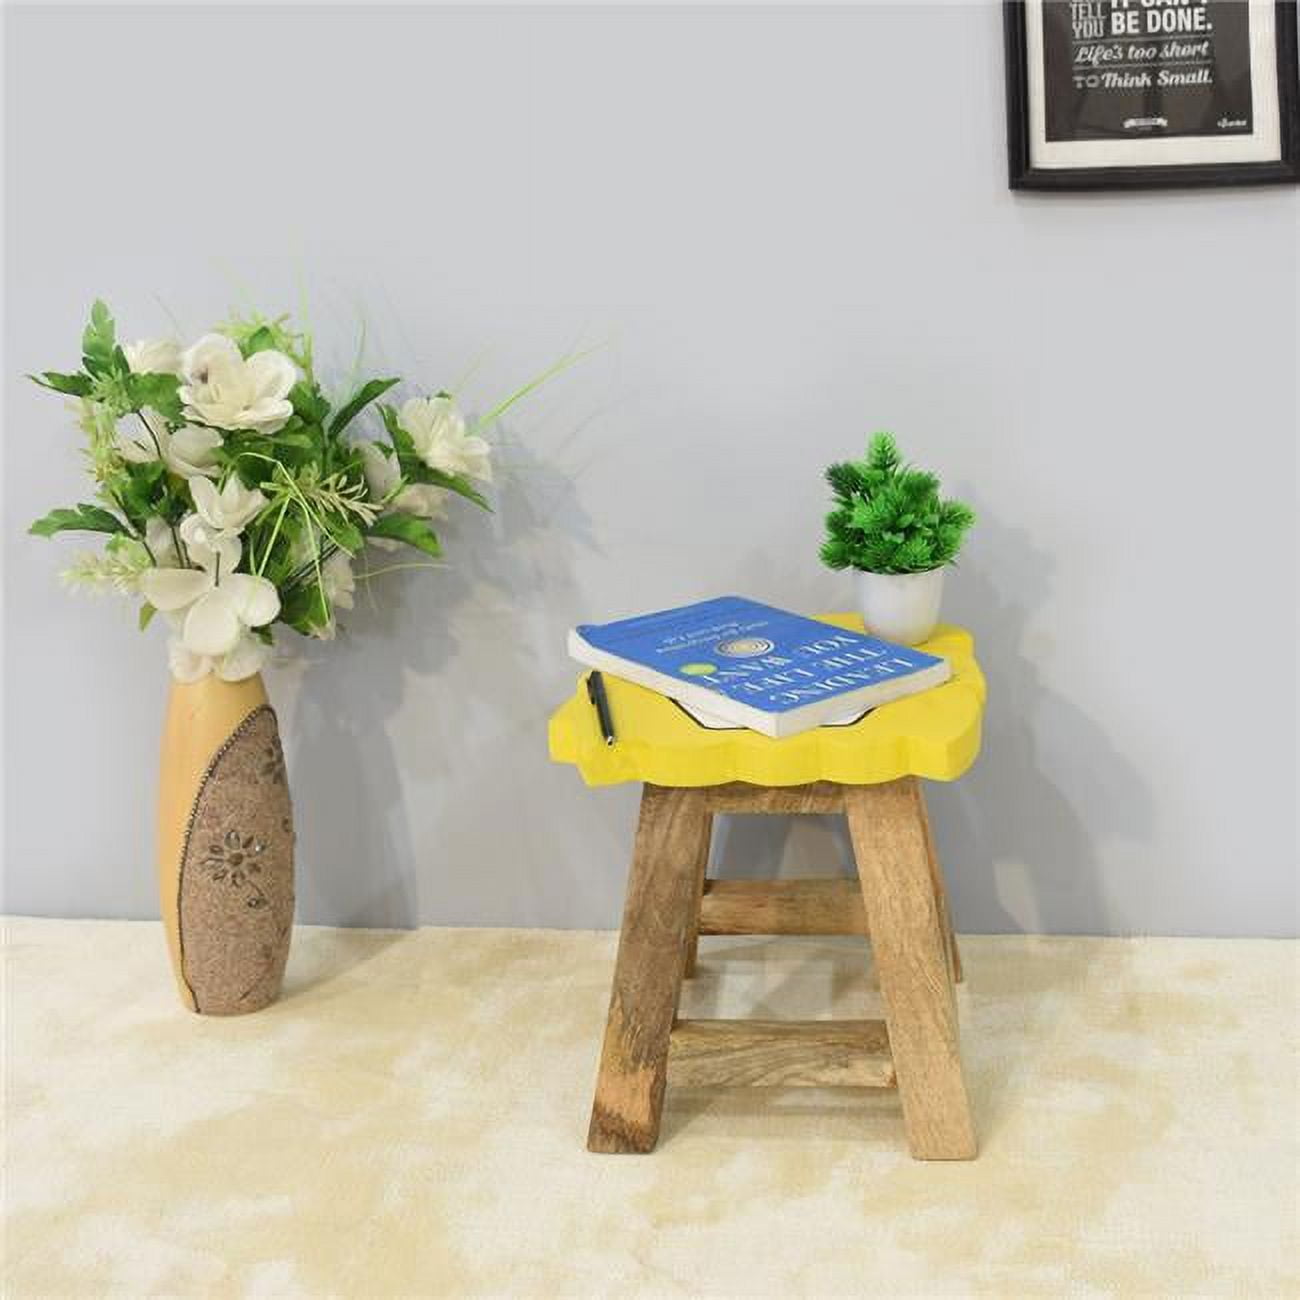 Picture of BBH Homes UBBBRSST0002SC5HS 28 x 30 x 28 cm Handmade 100 Percent Mango Wood Lion Shaped Seat Indoor Kids Stool, Yellow